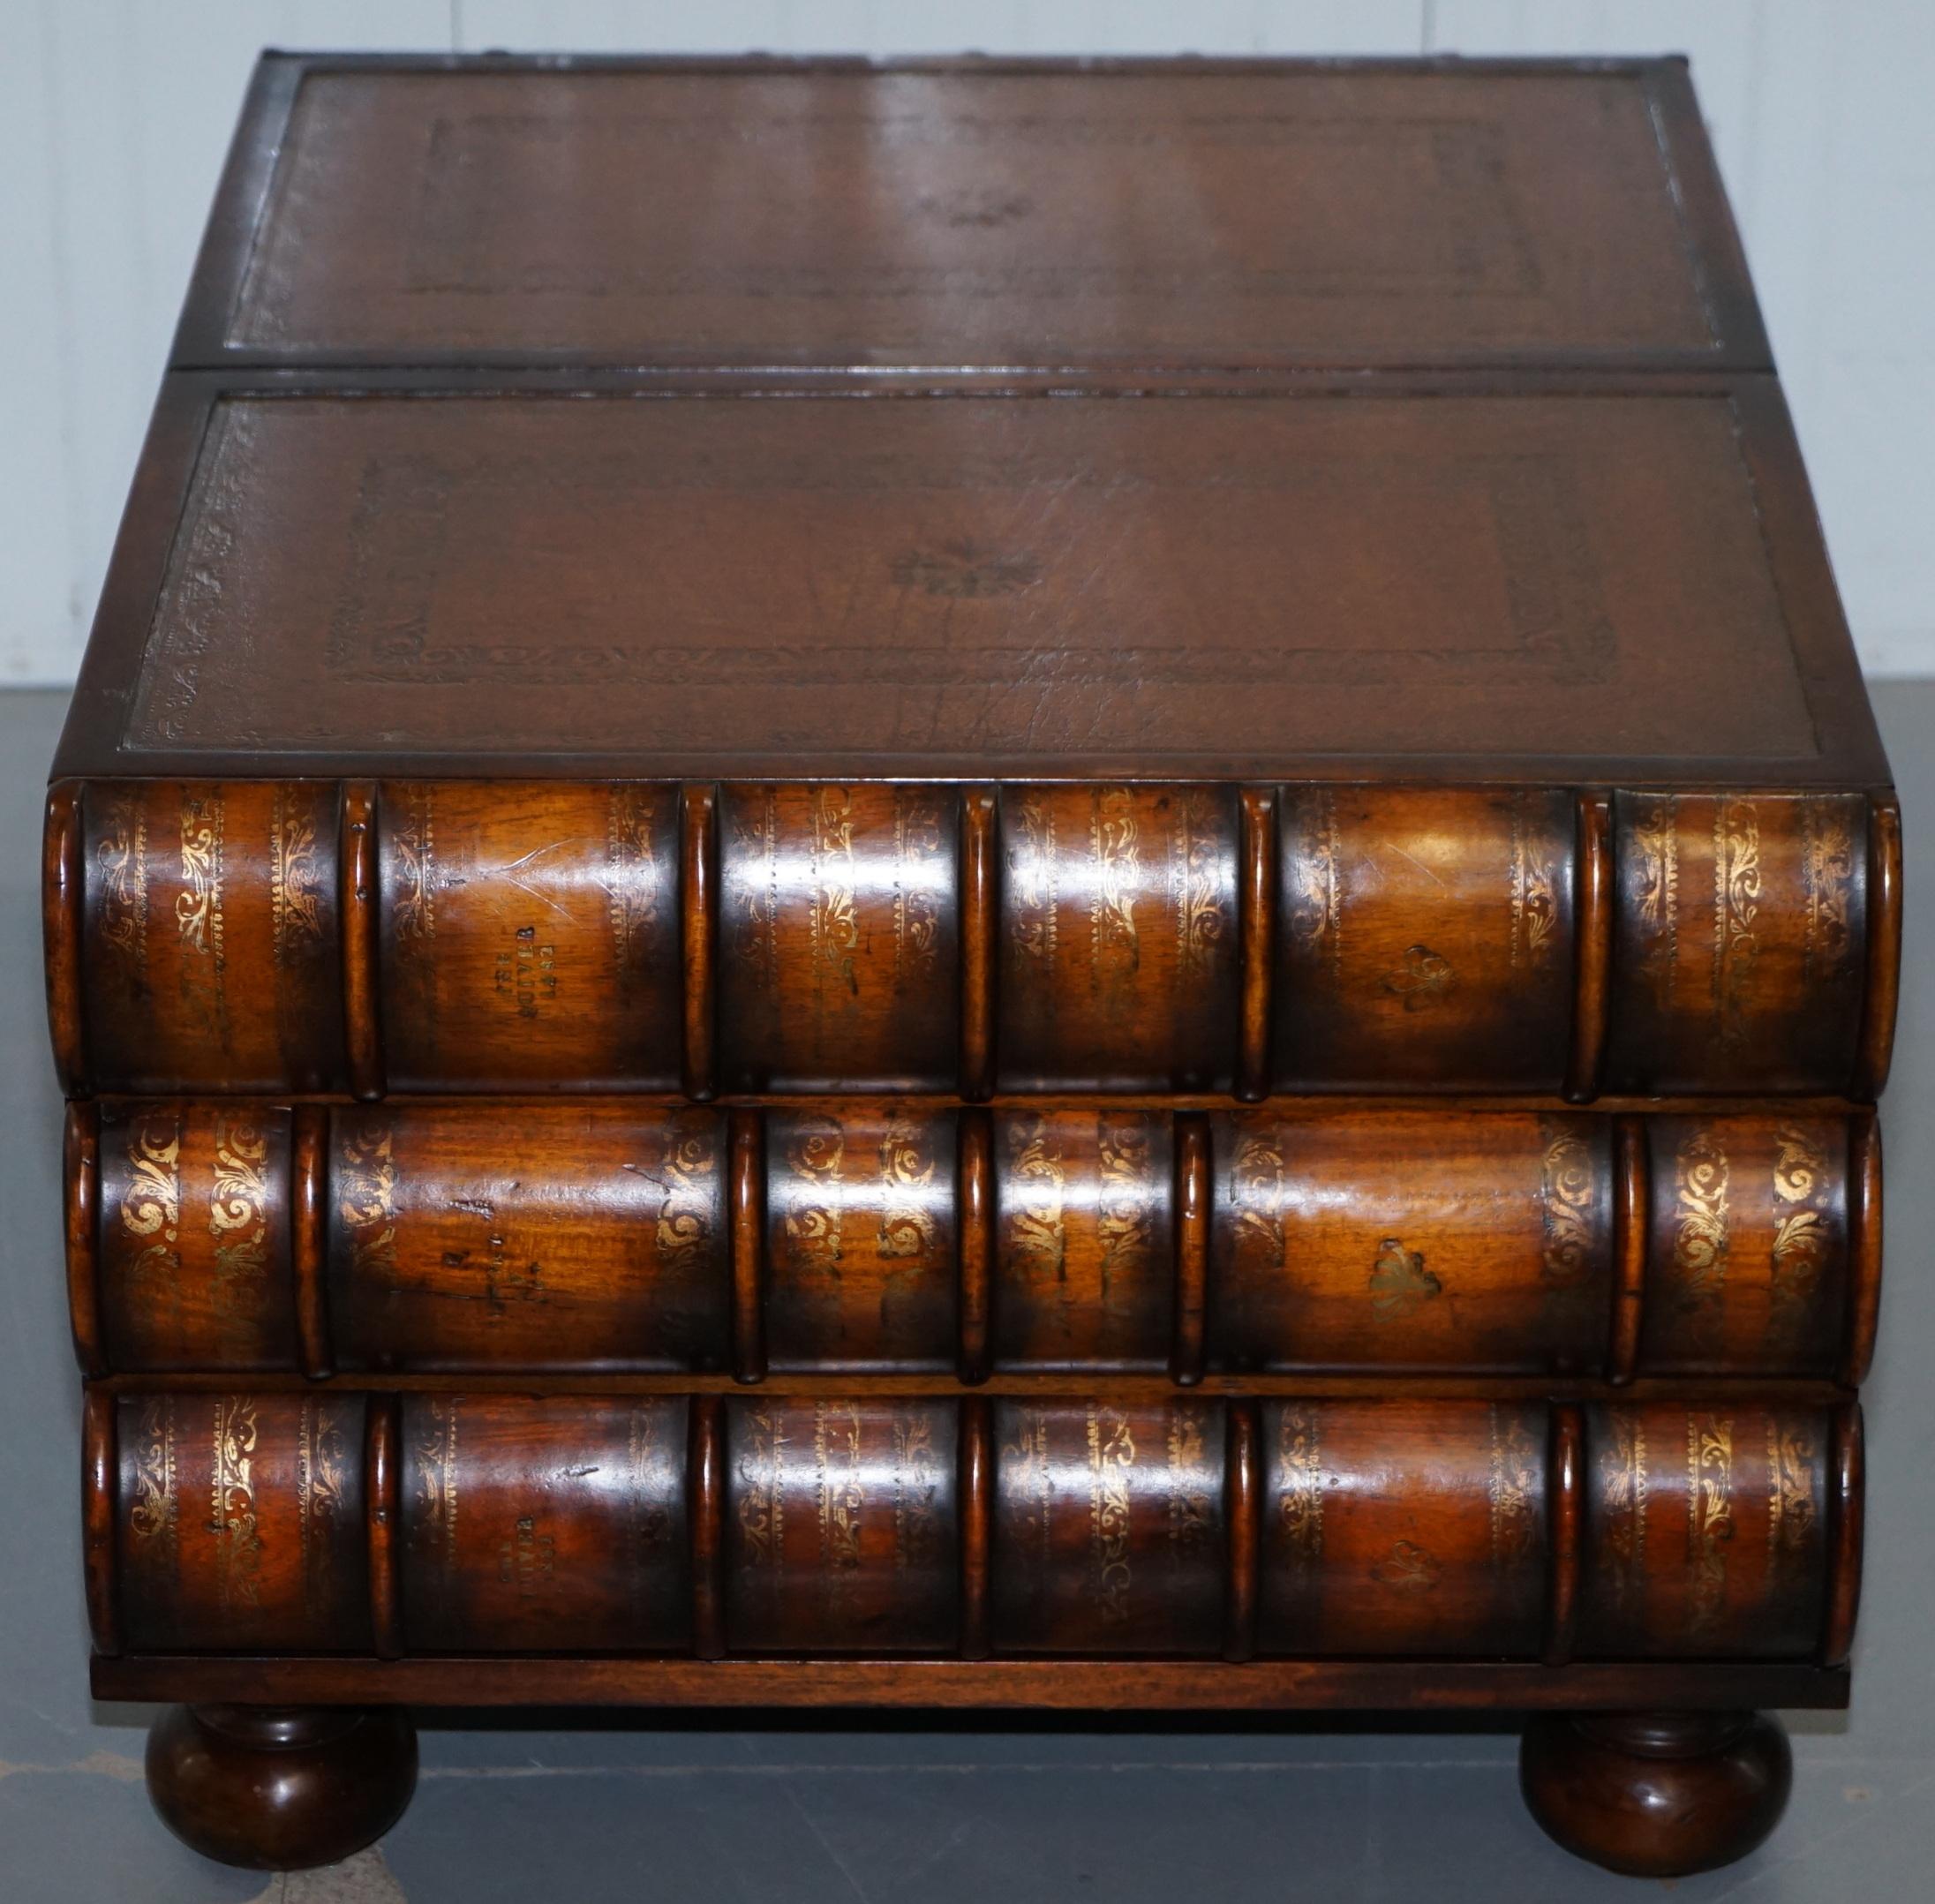 We are delighted to offer for sale this stunning Theodore Alexander coffee table with six drawers in the form of a stack of scholars books 

This is one of the nicest coffee tables I’ve seen, we have £40,000 pieces of art and furniture in the